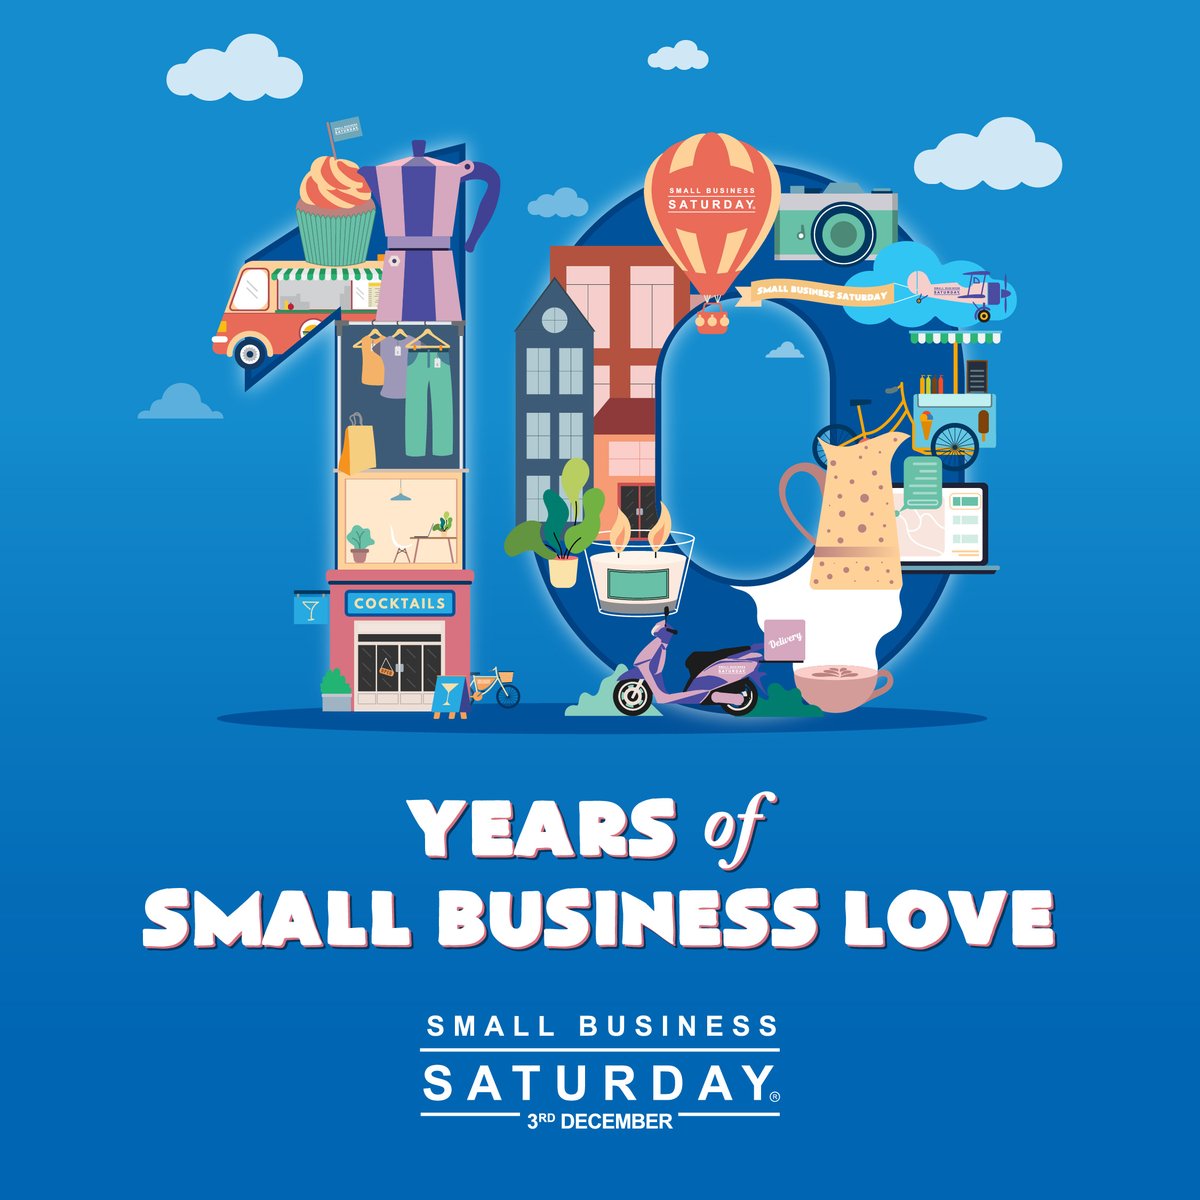 This weekend is #SmallBusinessSaturday!
We're very proud of our local businesses in #SouthYorkshire & Saturday you can celebrate them by:
💰Shopping local if you can
👍Supporting them on social media
🗣 Telling your friends about your favourite businesses
⭐Leaving them a review